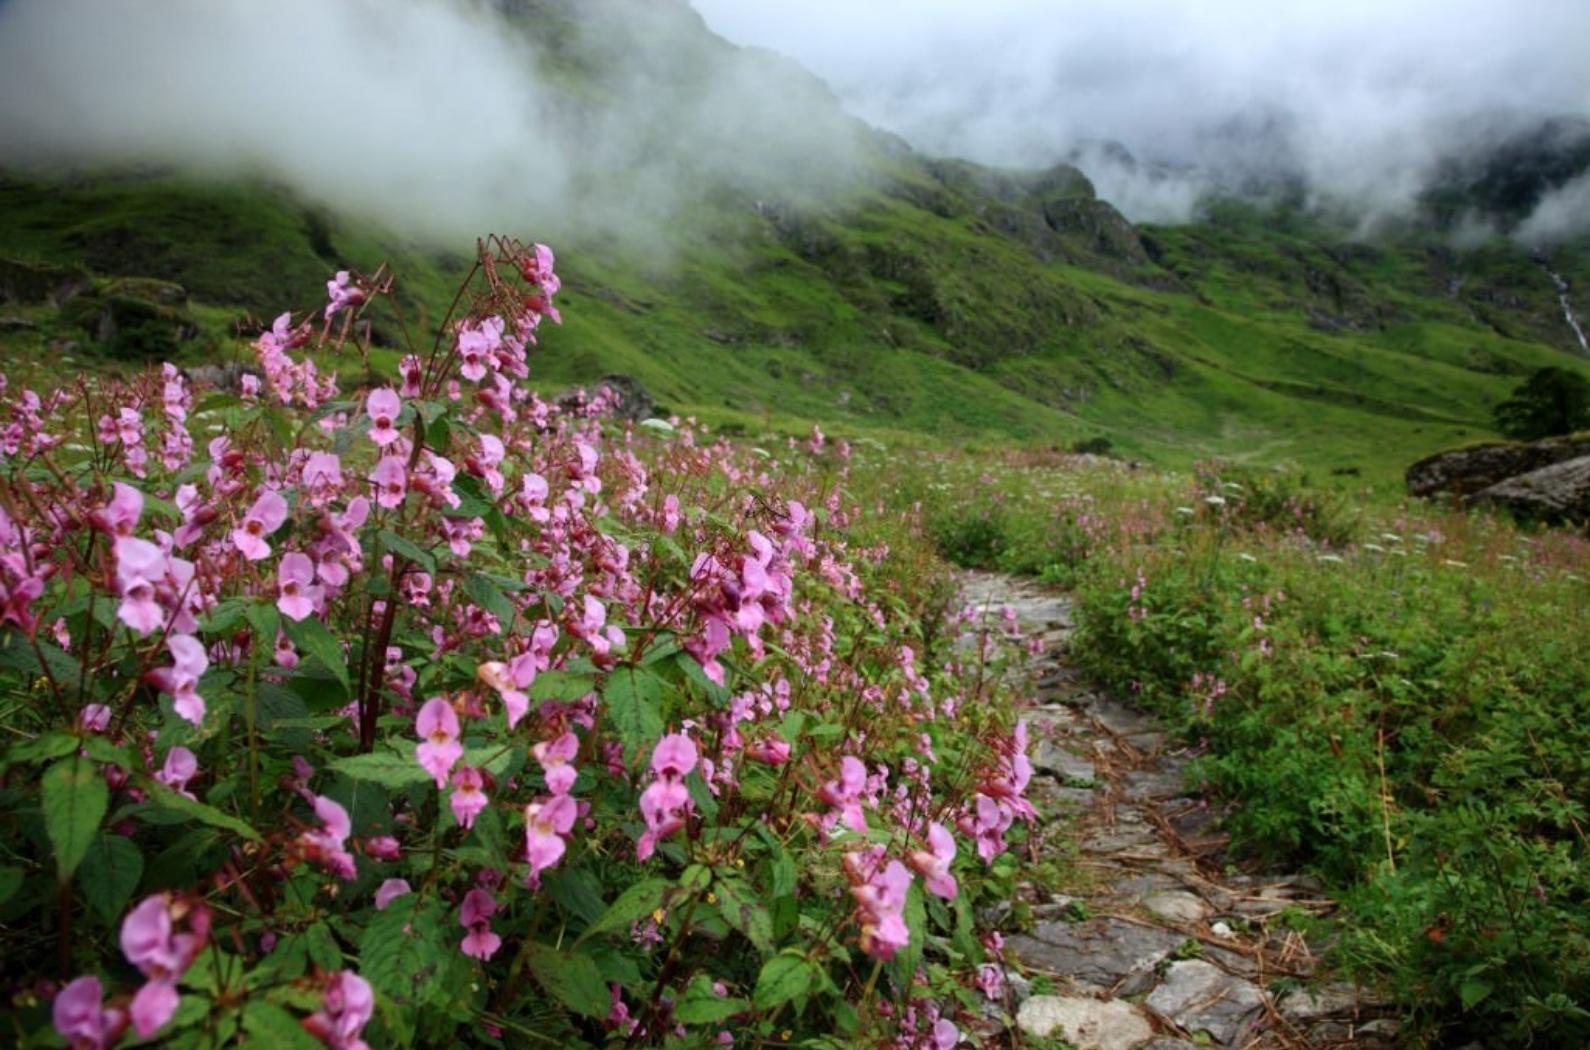 Beautiful mountains in the Valley of Flowers. Valley of flowers is a tourist attraction in the Himalayas.